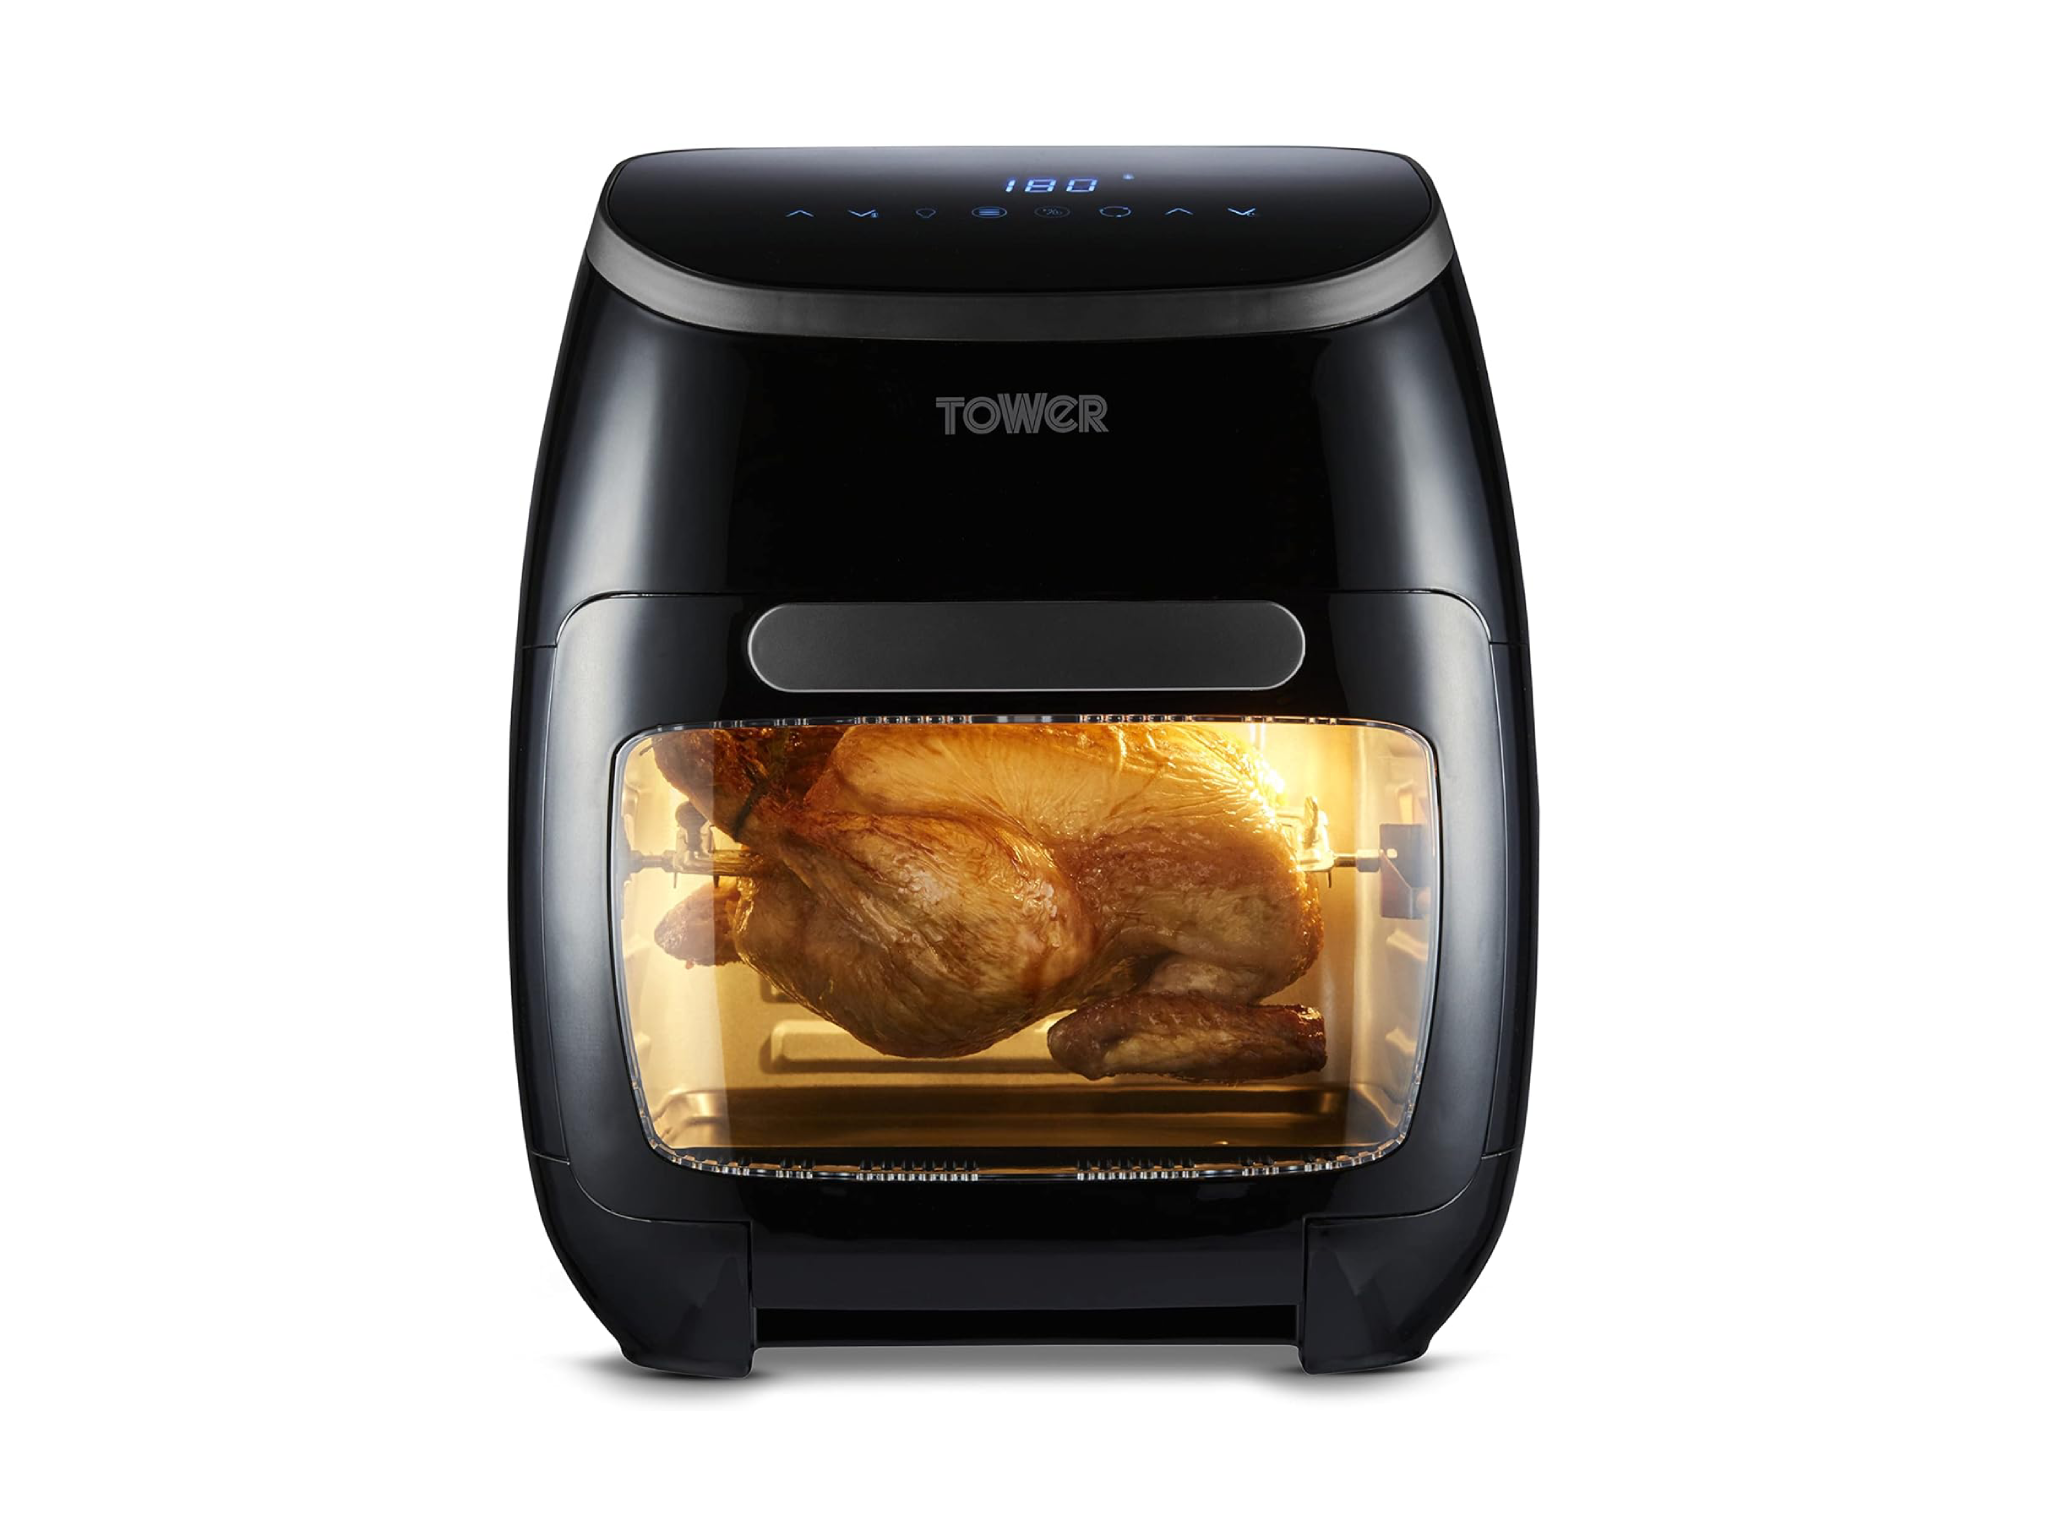 best-air-fryer-review-tower-indybest.png